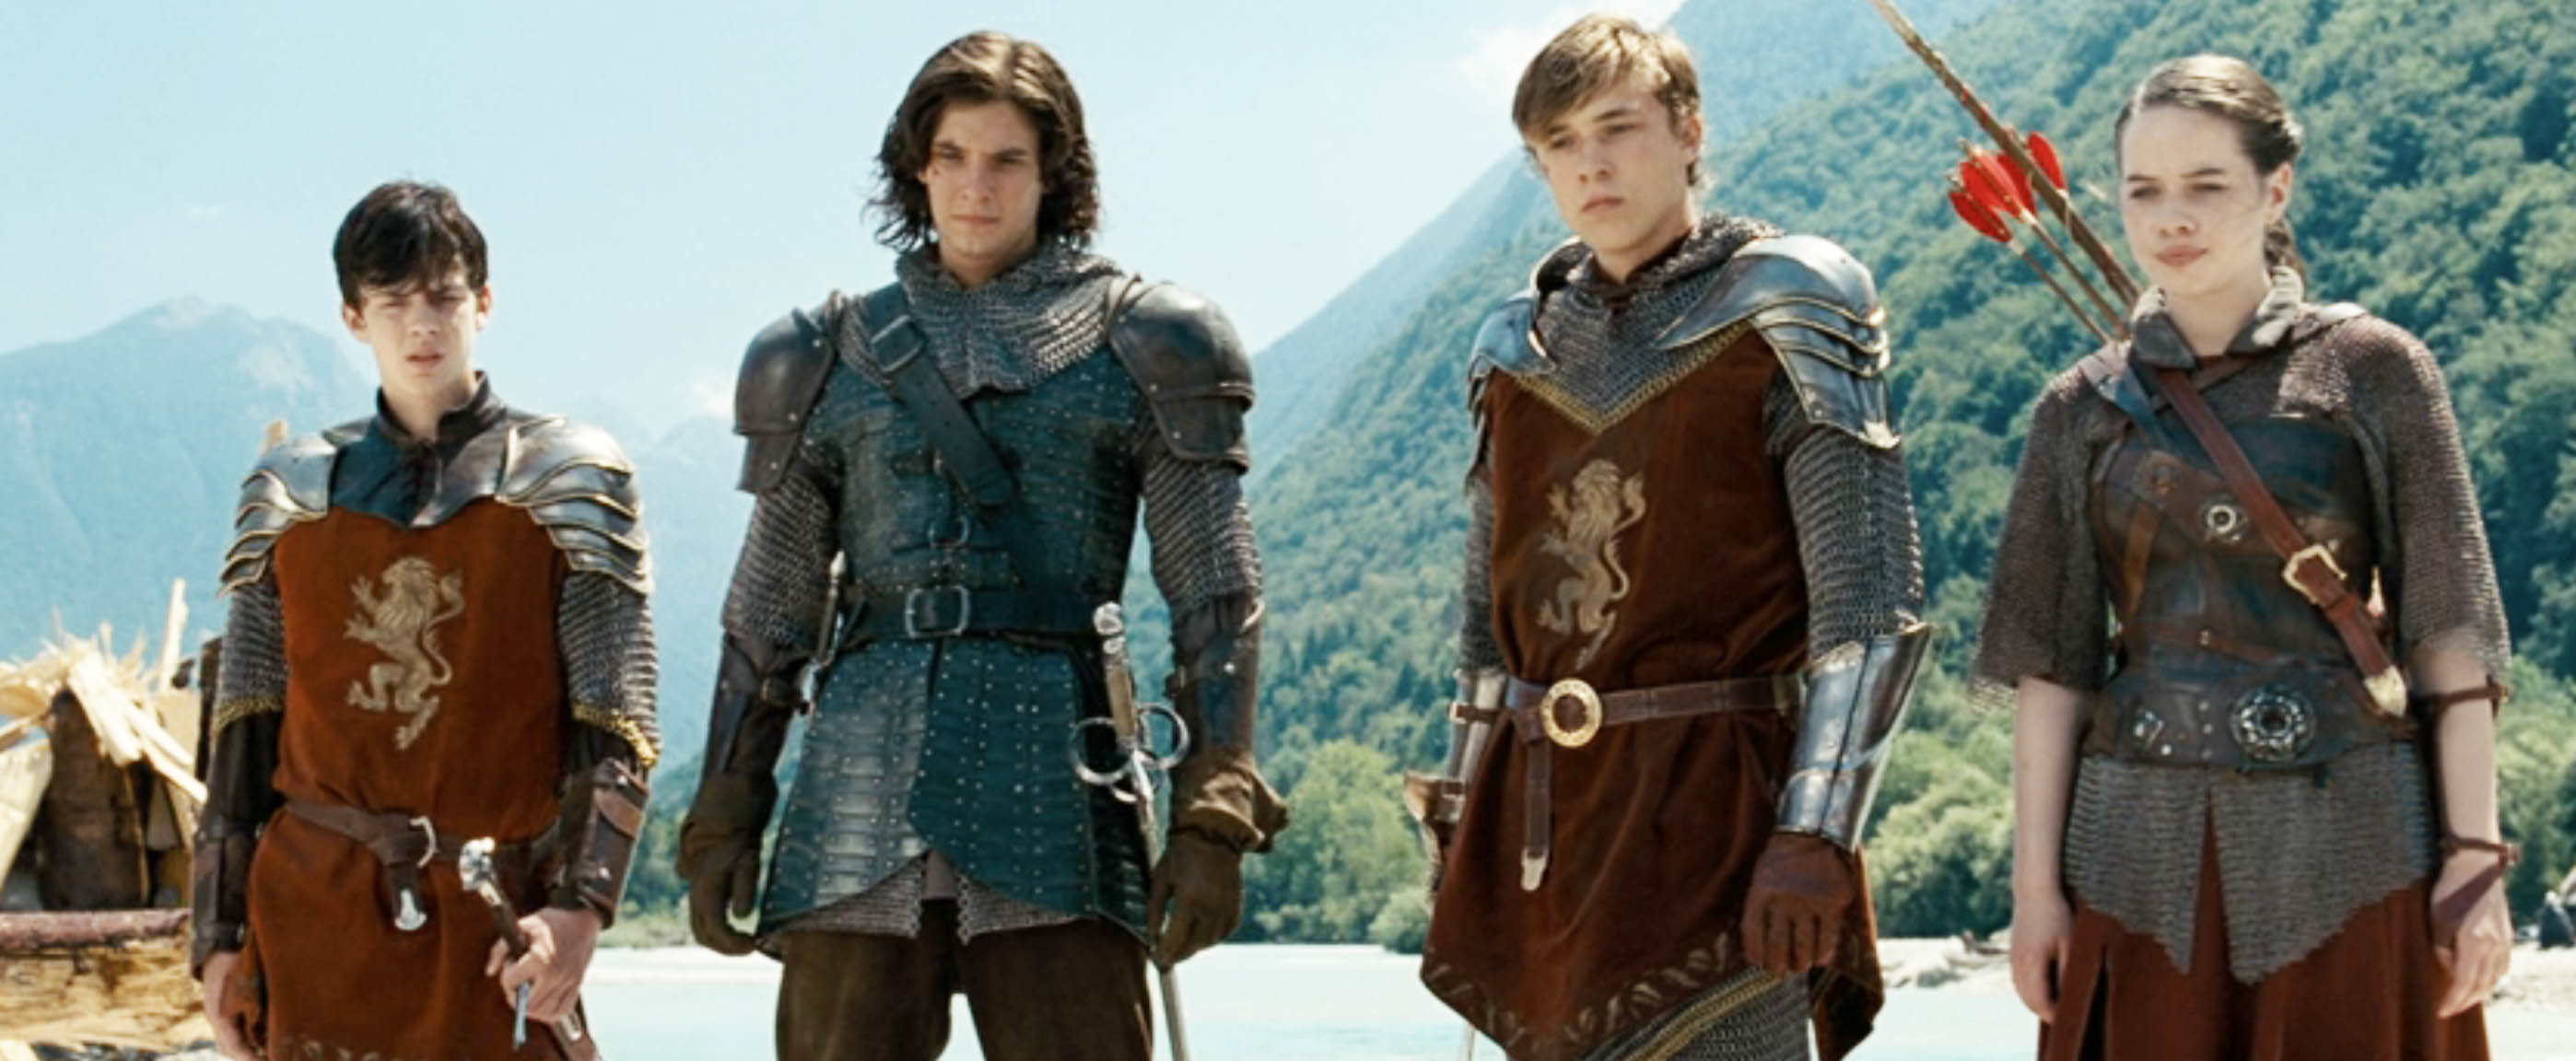 The Pevensie siblings stand alongside Prince Caspian in &quot;The Chronicles of Narnia&quot;